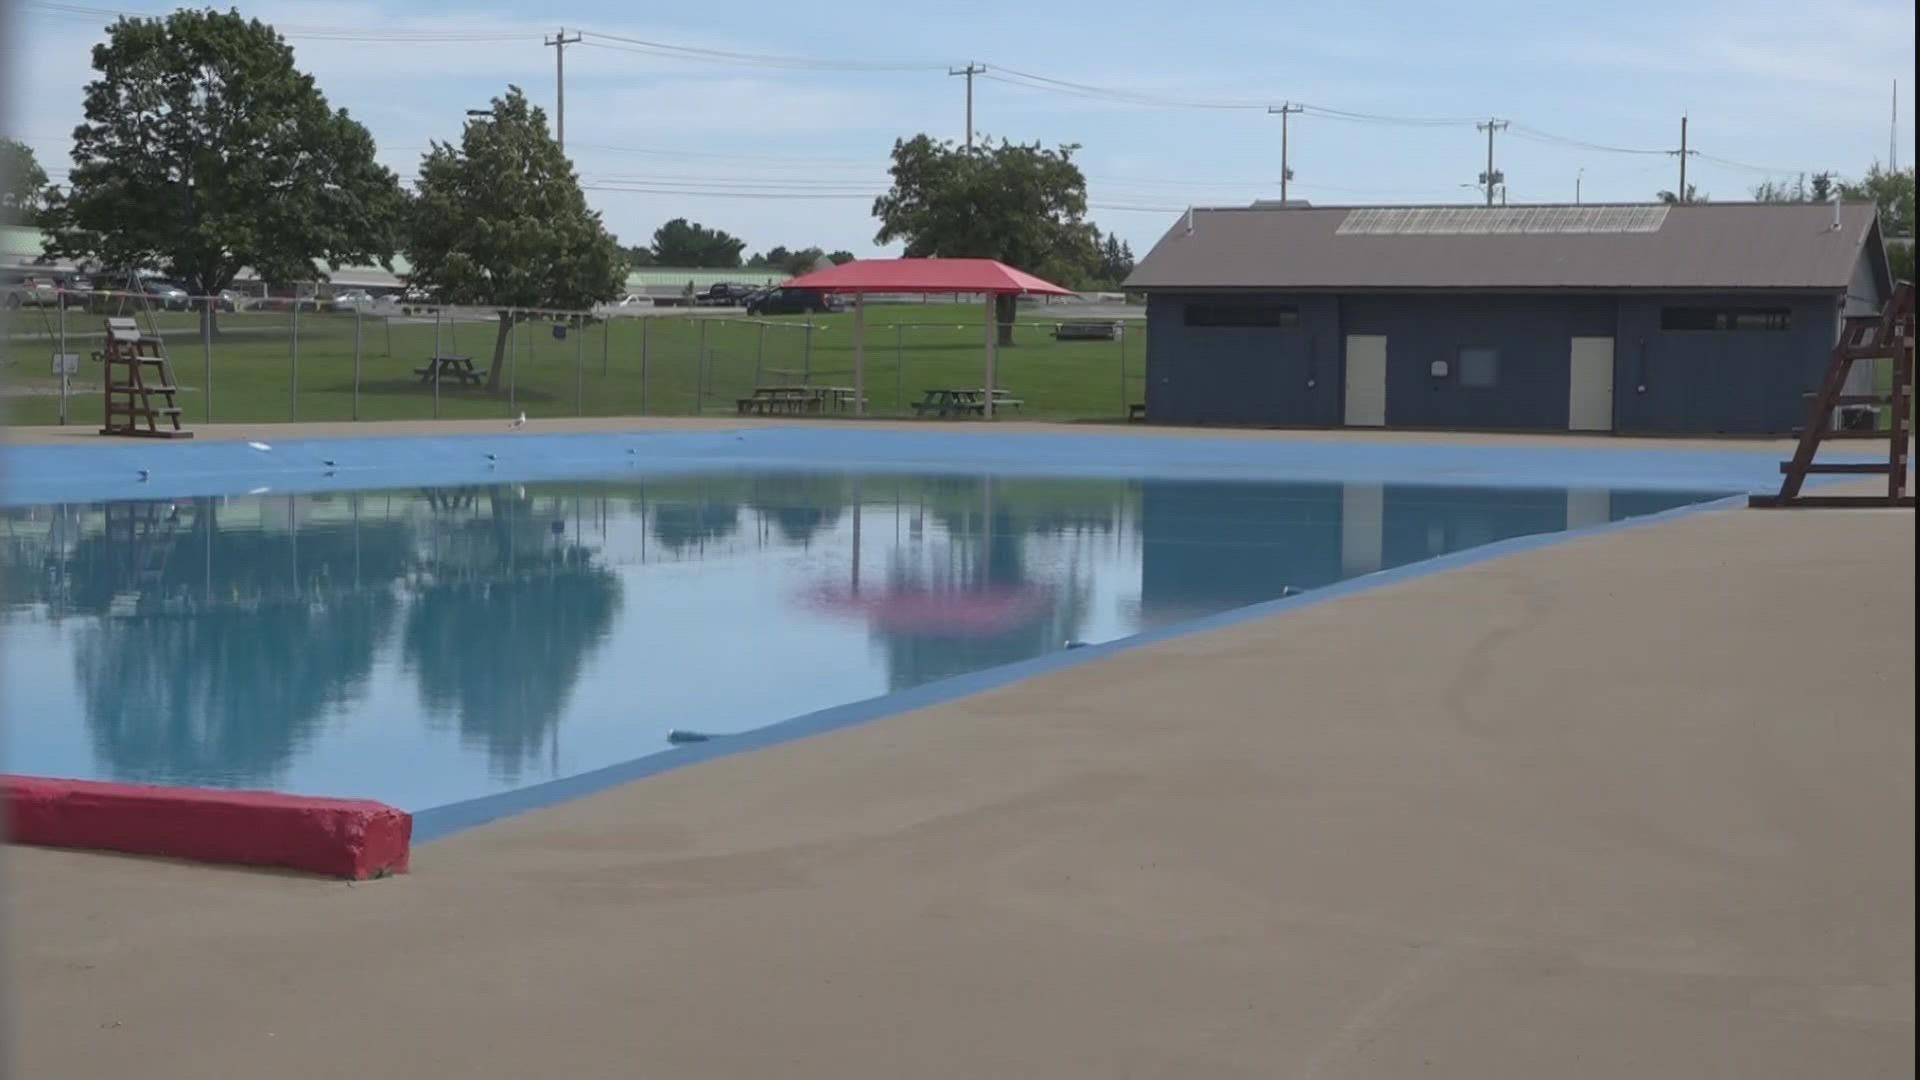 Brewer's Parks & Rec. Dept. was notified yesterday that several shards of glass were found at the pool's edge.